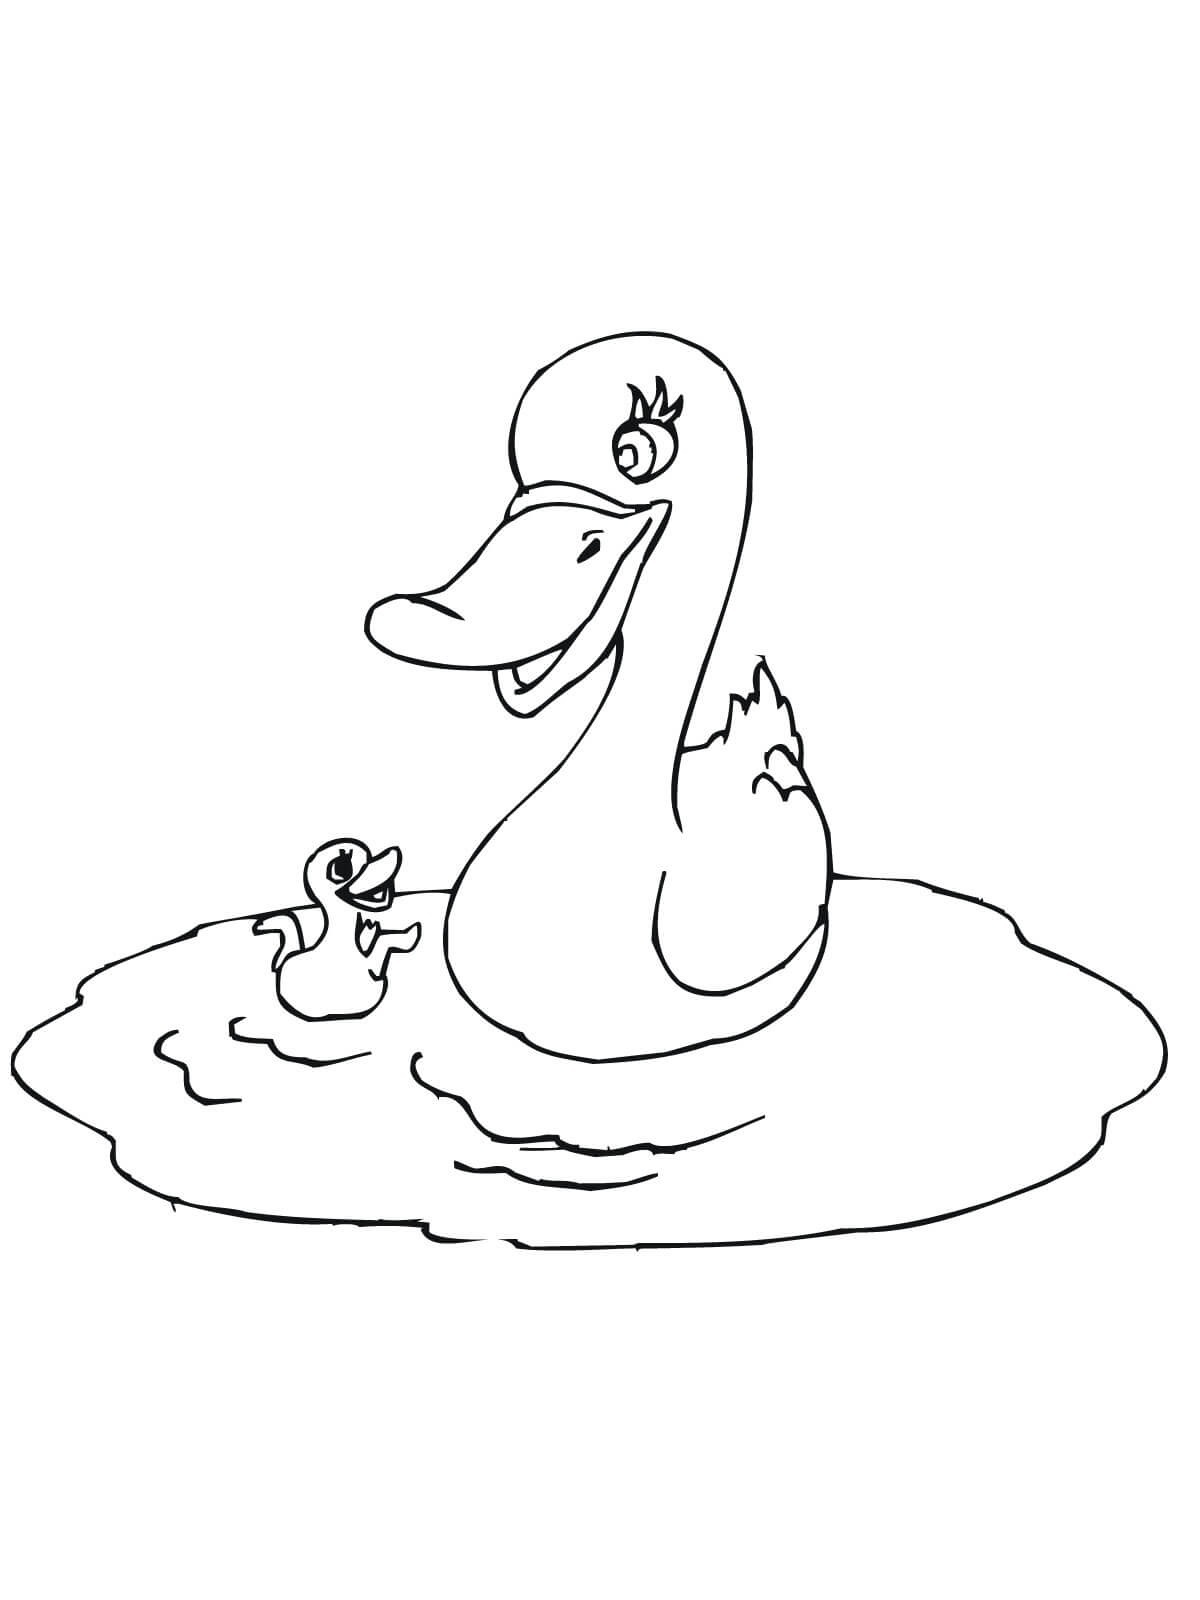 Mother duck with baby play in the pond Coloring Page